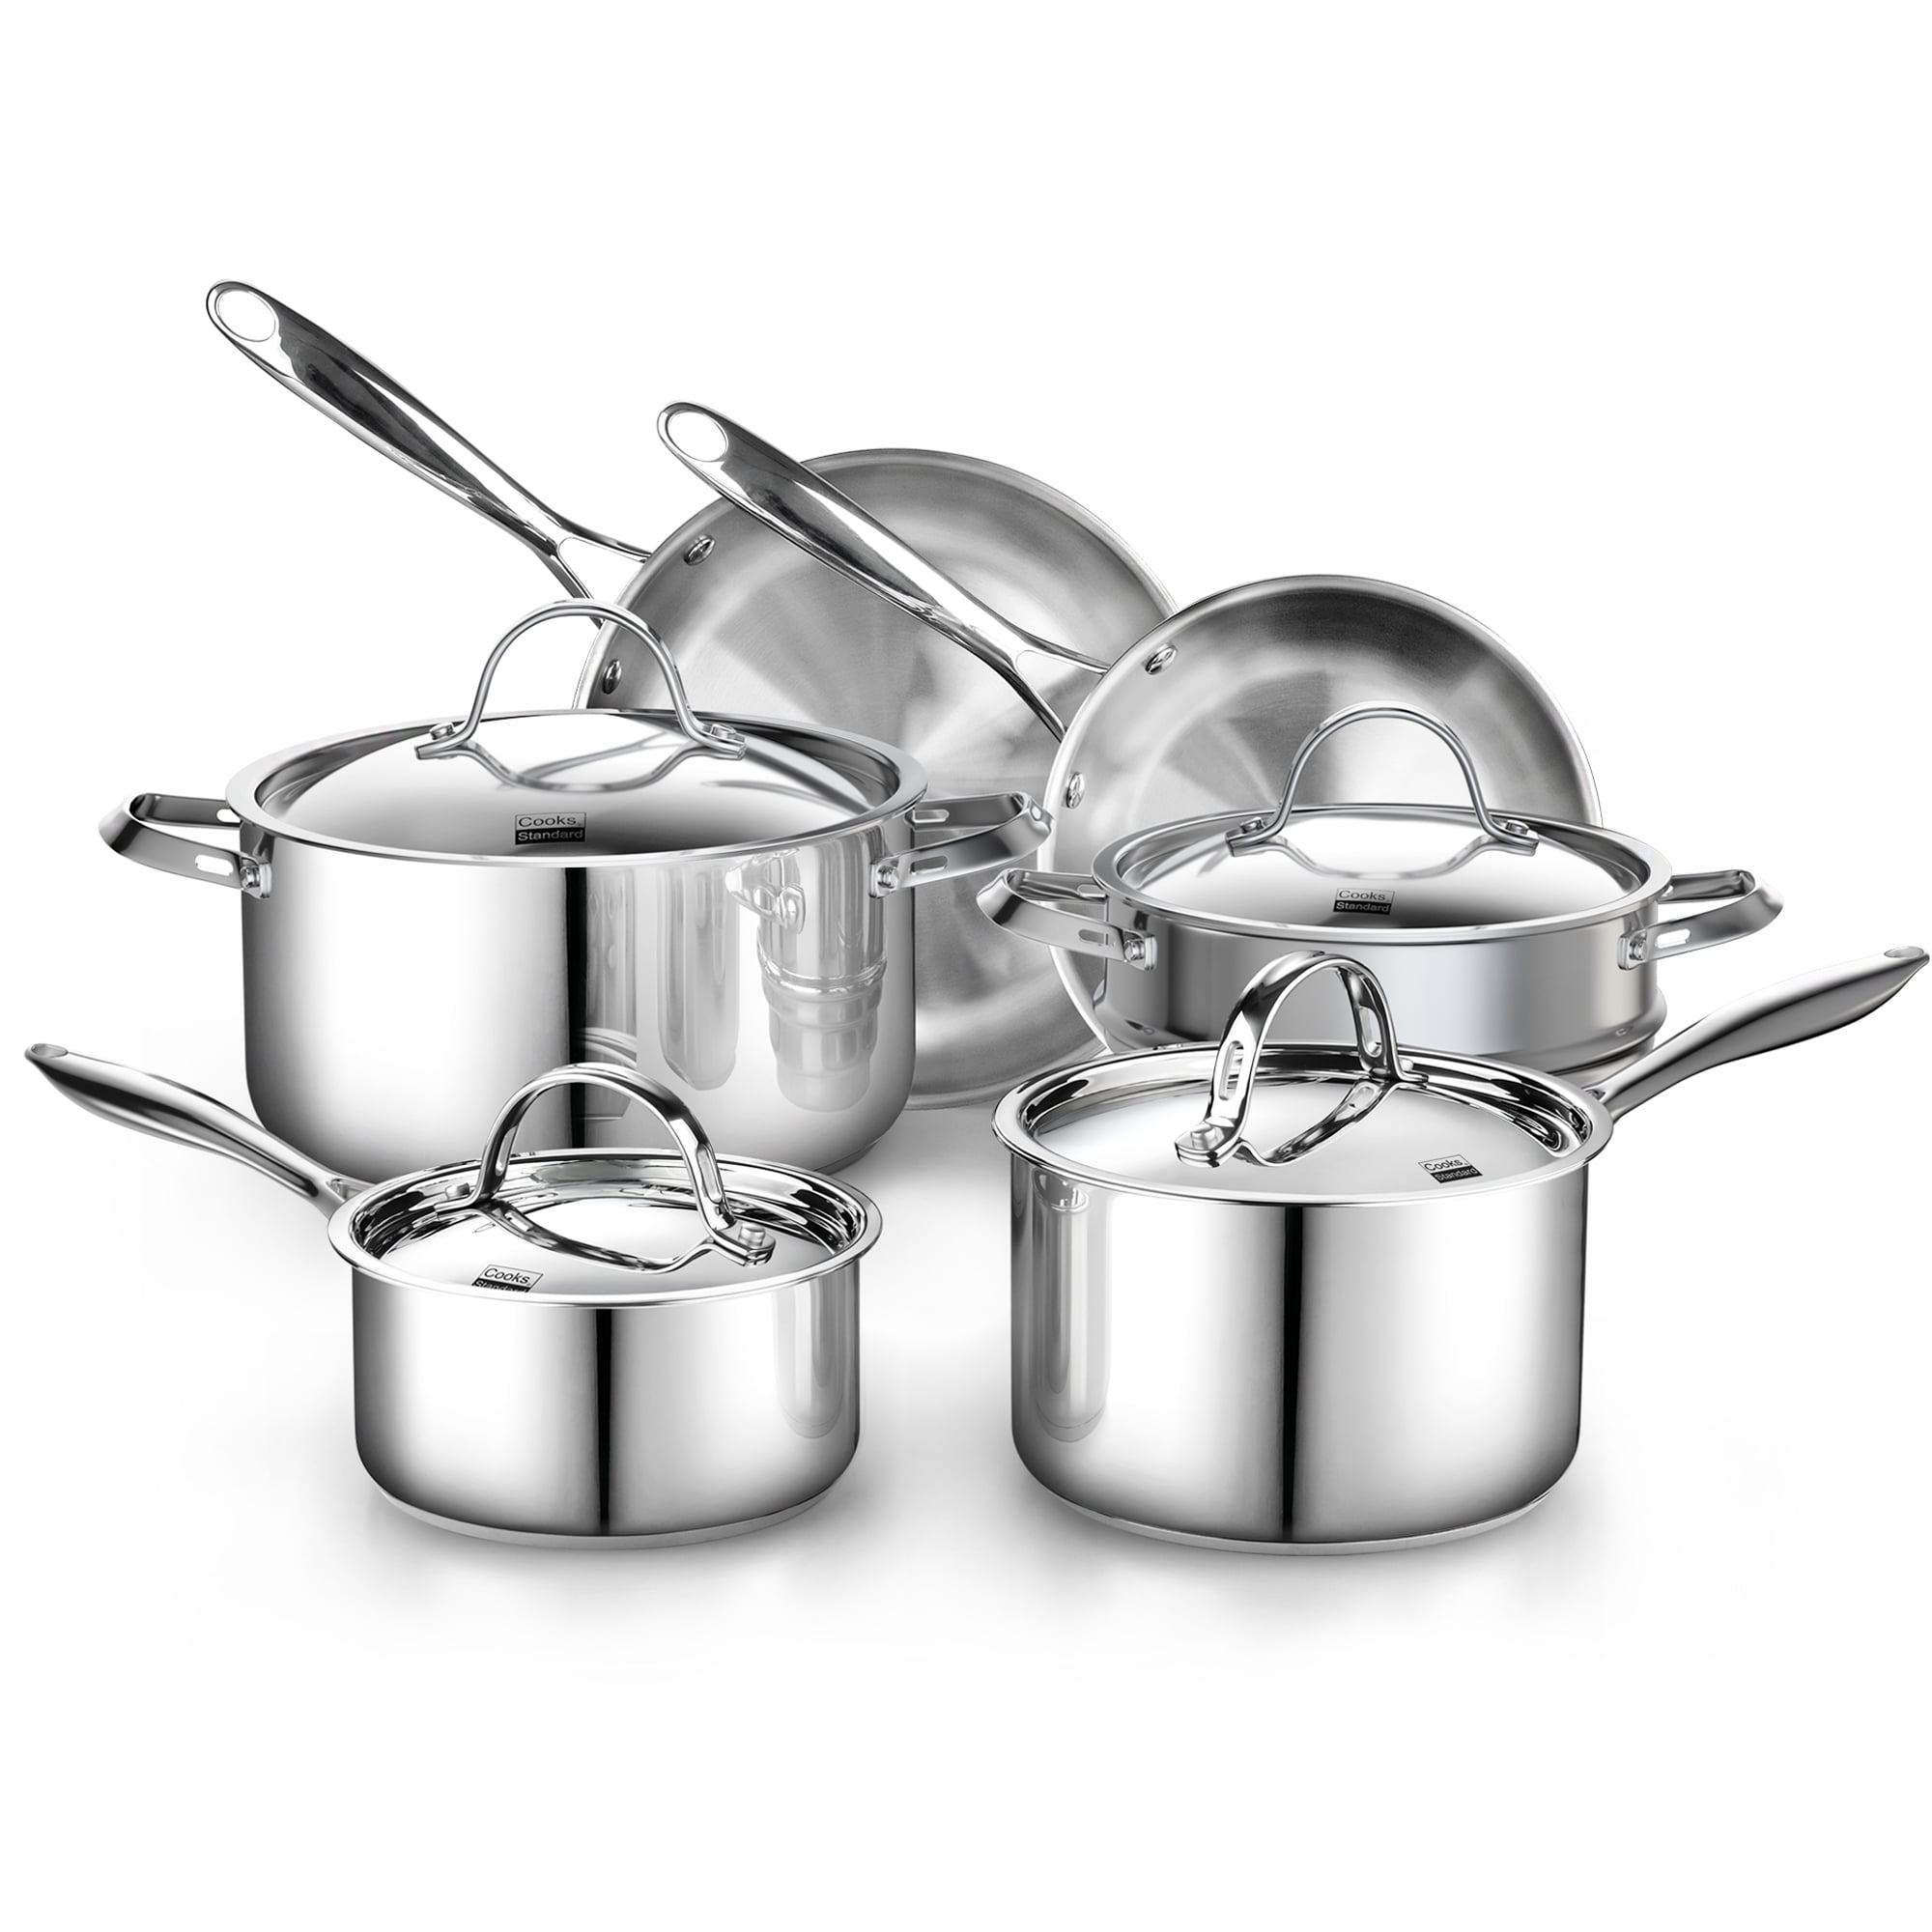 18/10 Tri-Ply Stainless Steel Cookware Set, Black - Cookware